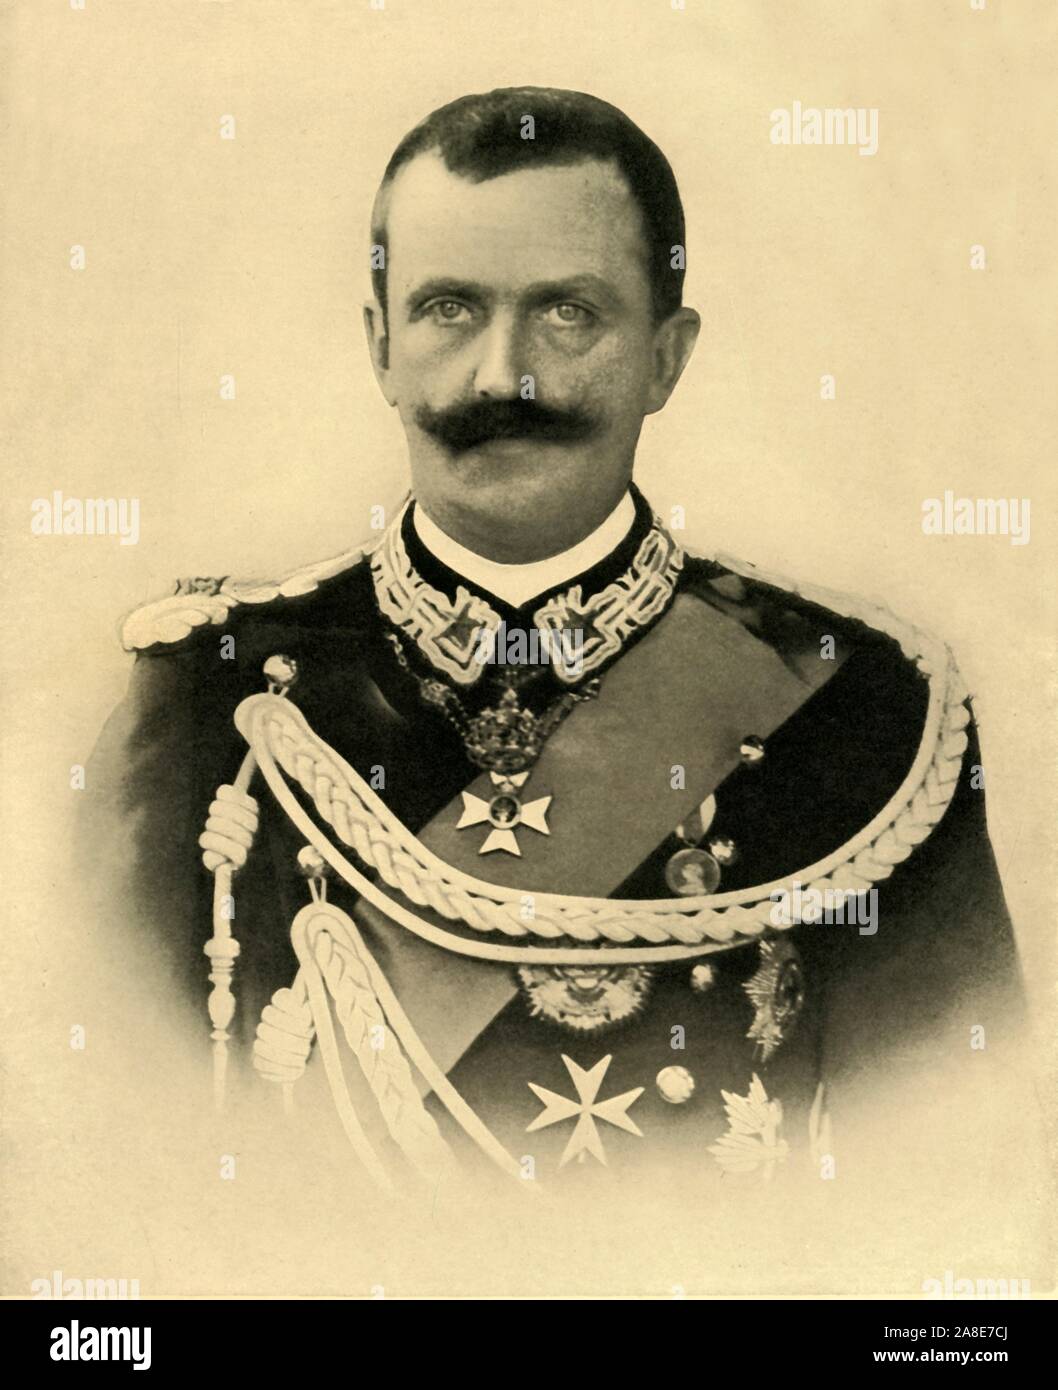 'H. M. Victor Emmanuel III, King of Italy', c1910s, (c1920). Portrait of Victor Emmanuel III (1869-1947) who reigned for nearly 46 years. After the assassination of Umberto I in 1900, the Kingdom of Italy became involved in two world wars. Victor Emmanuel's reign also encompassed the birth, rise, and fall of Italian Fascism. Frontispiece from &quot;The Great World War: A History&quot;, Volume V, edited by Frank A Mumby. [The Gresham Publishing Company Ltd, London, c1920] Stock Photo